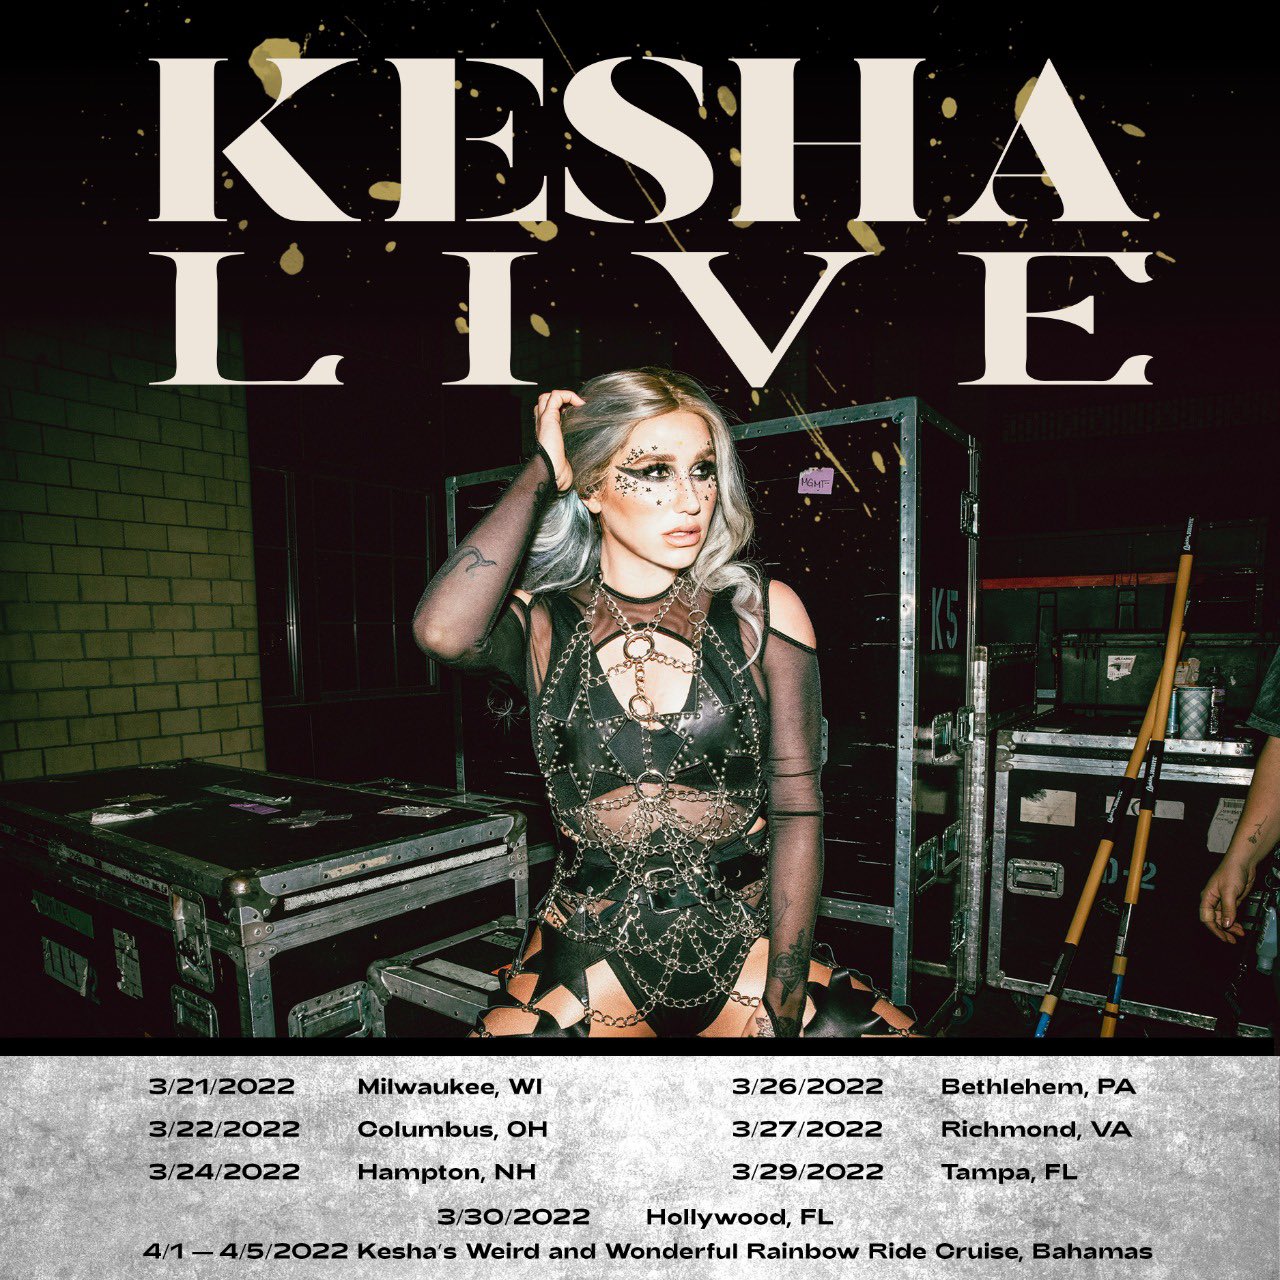 Kesha shares the tour flyer for her upcoming dates